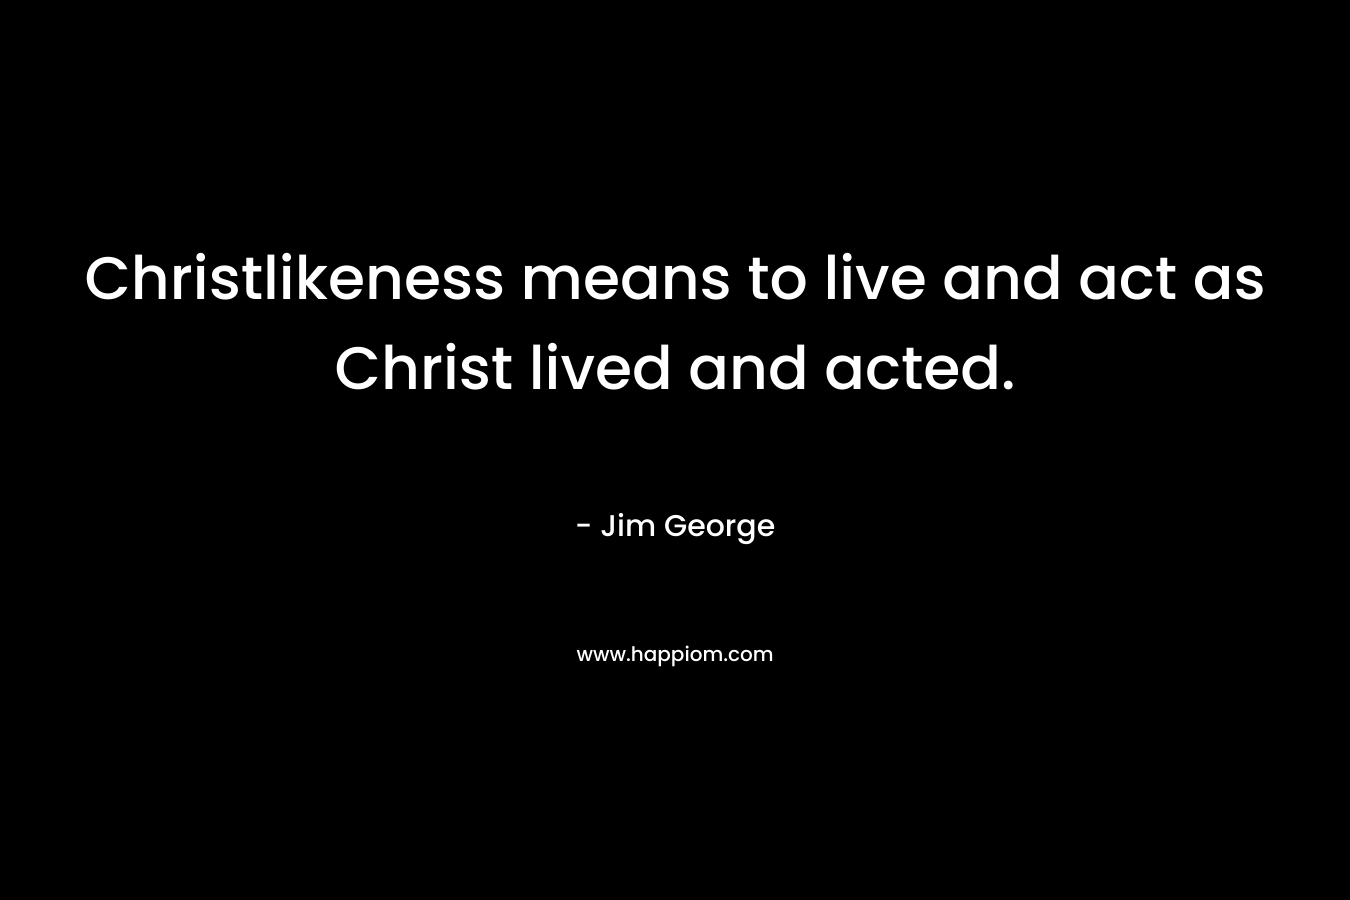 Christlikeness means to live and act as Christ lived and acted. – Jim George